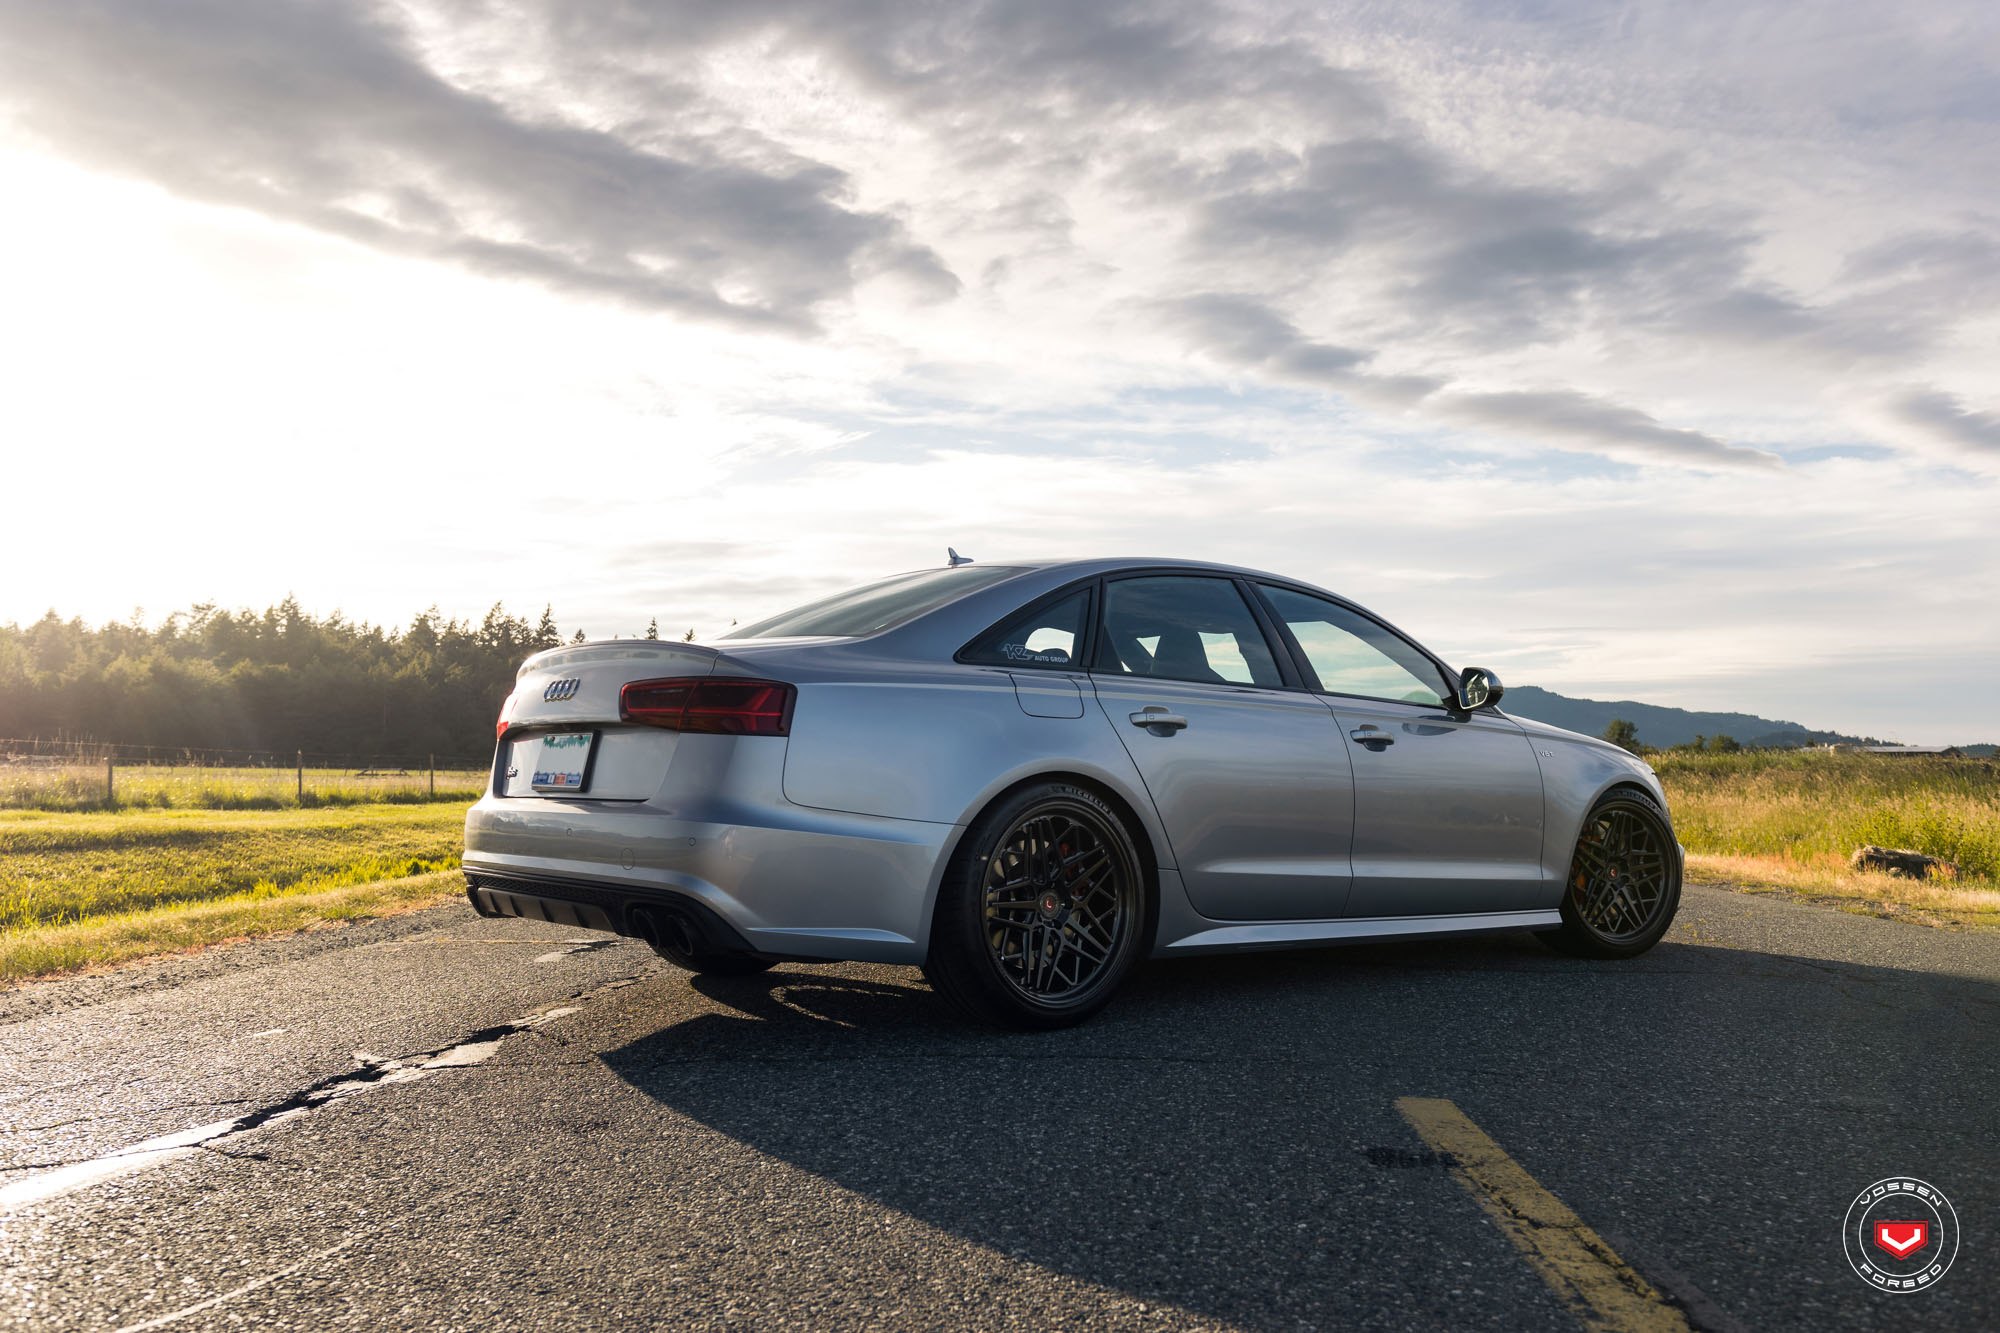 Silver Audi S6 with Red Smoke LED Taillights - Photo by Vossen